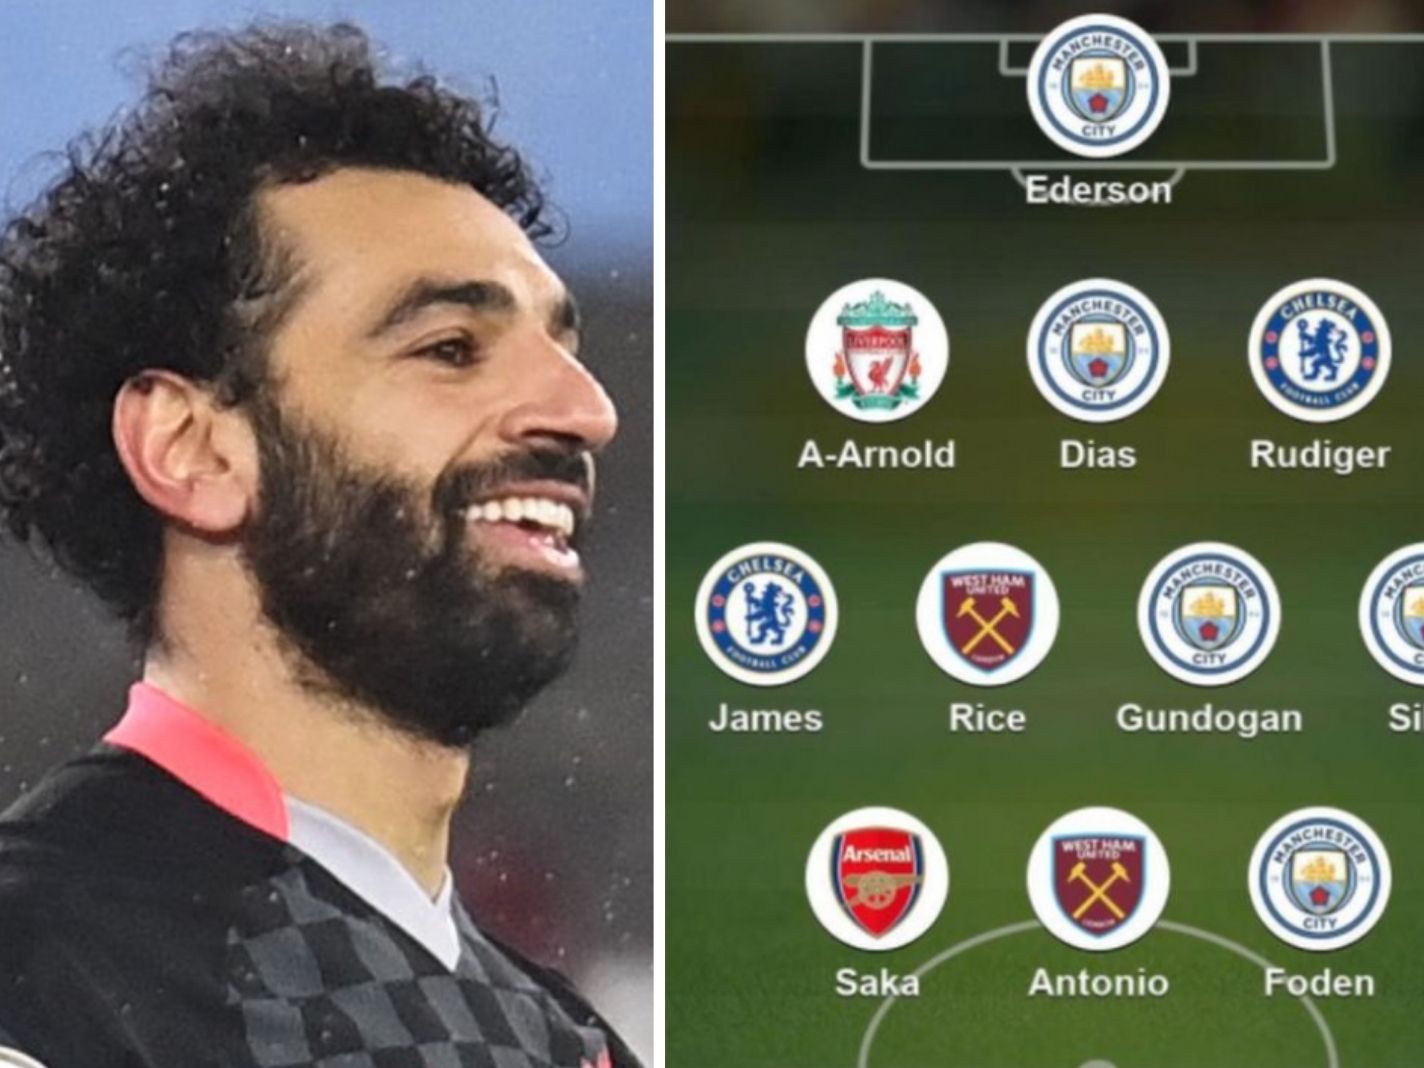 Mohamed Salah was not picked in Garth Crooks' team of the year